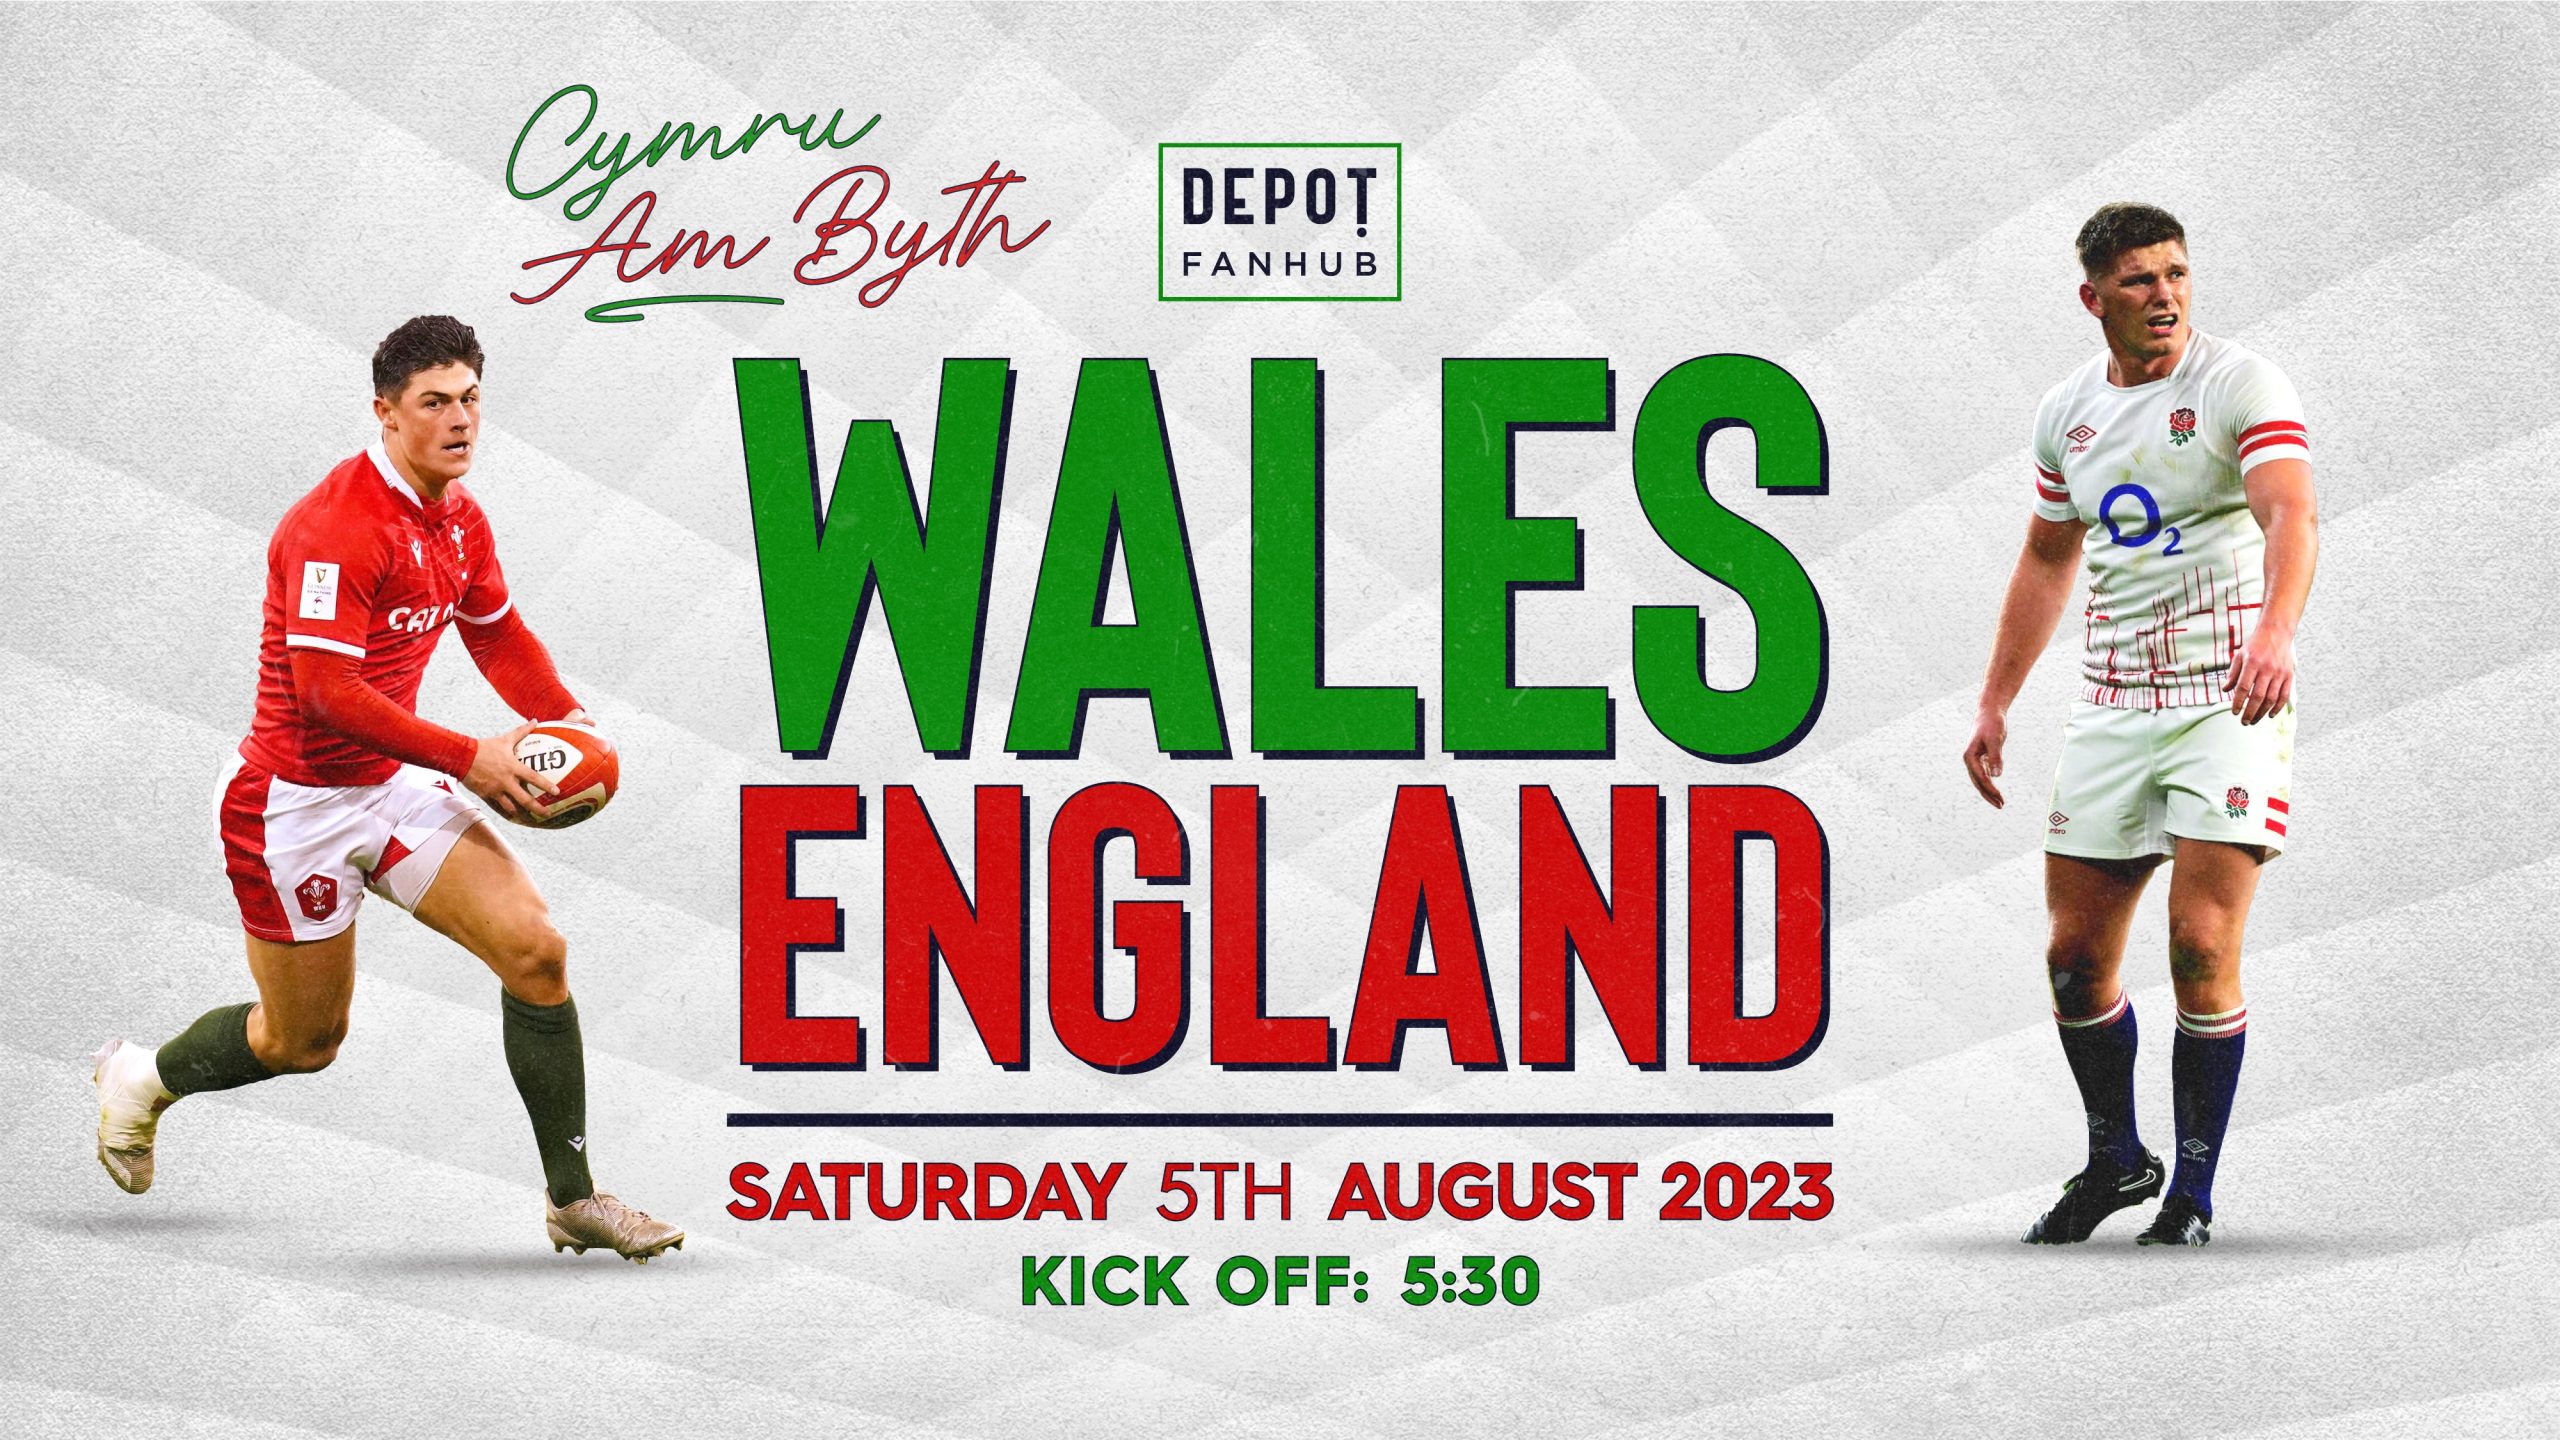 RUGBY WORLD CUP: Wales V Portugal - DEPOT